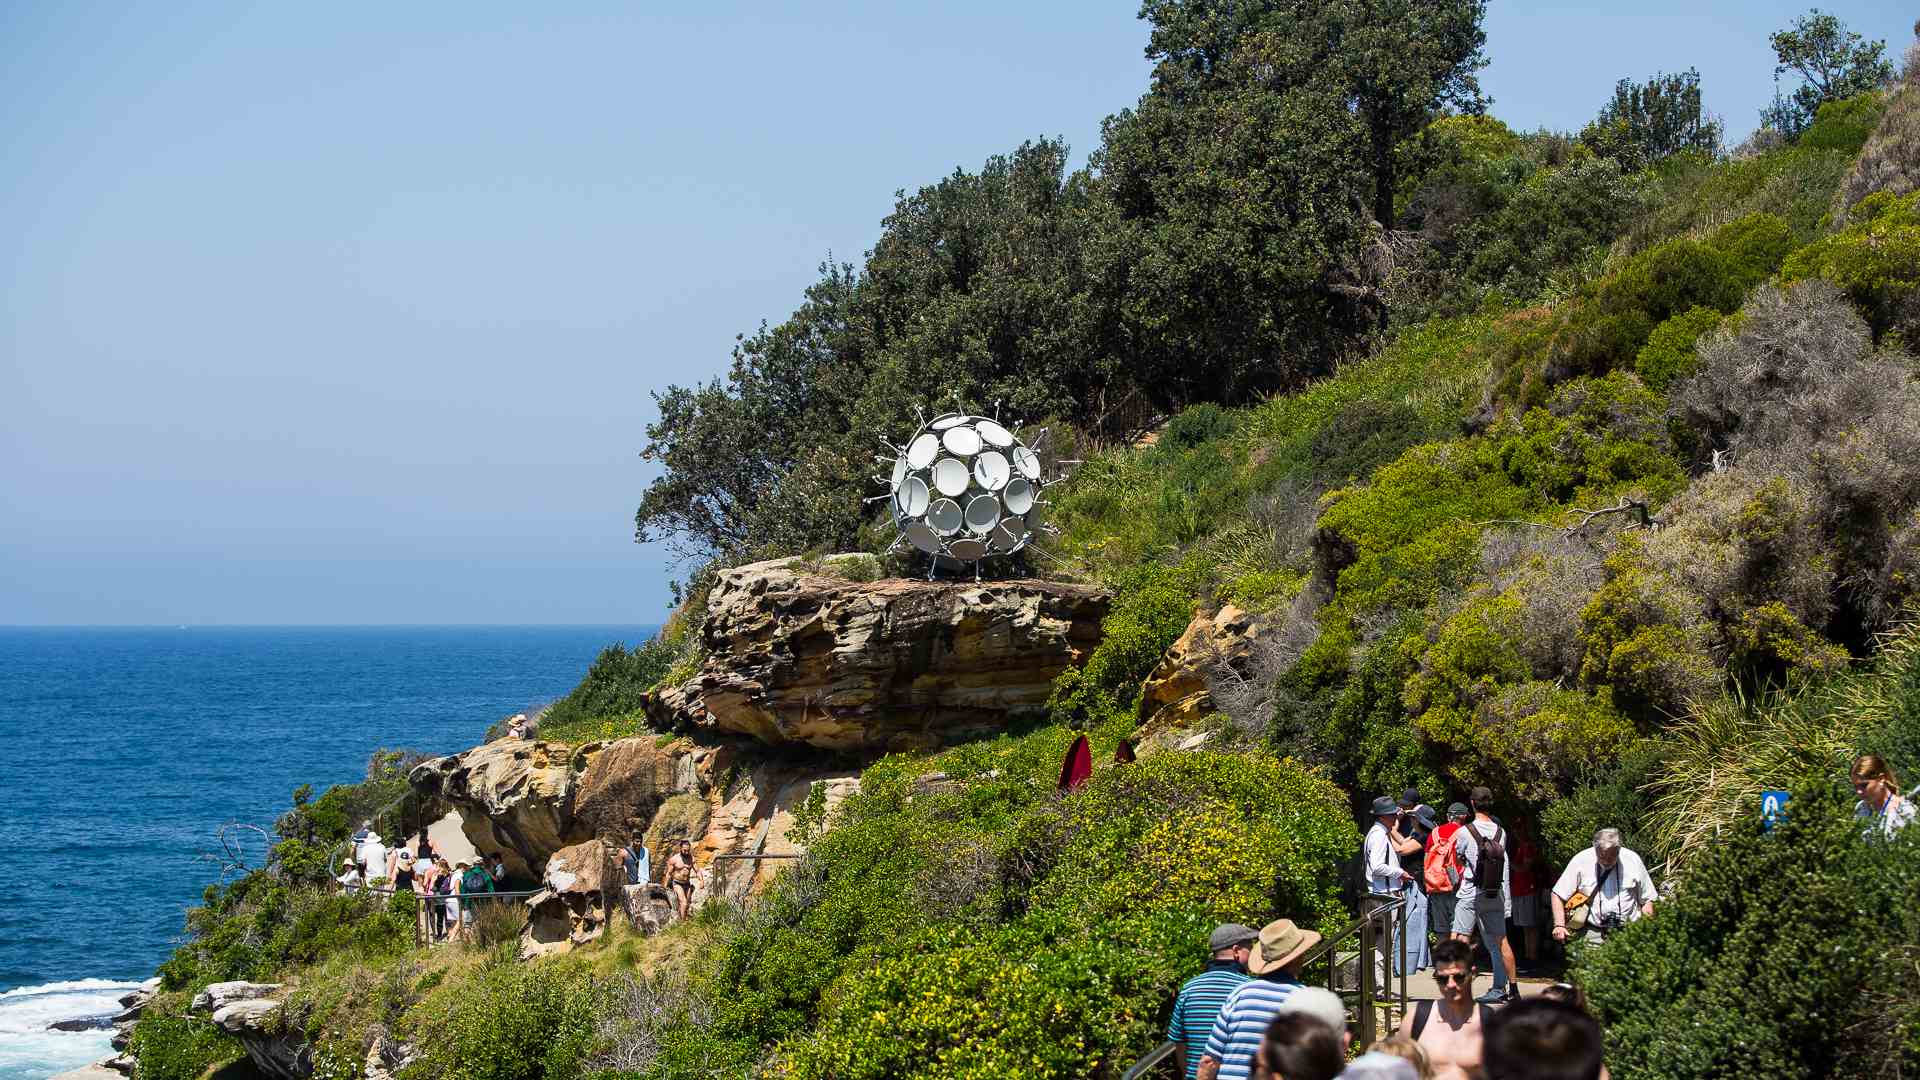 Sculpture by the Sea Has Been Postponed for the Second Year in a Row and Will Now Return in 2022